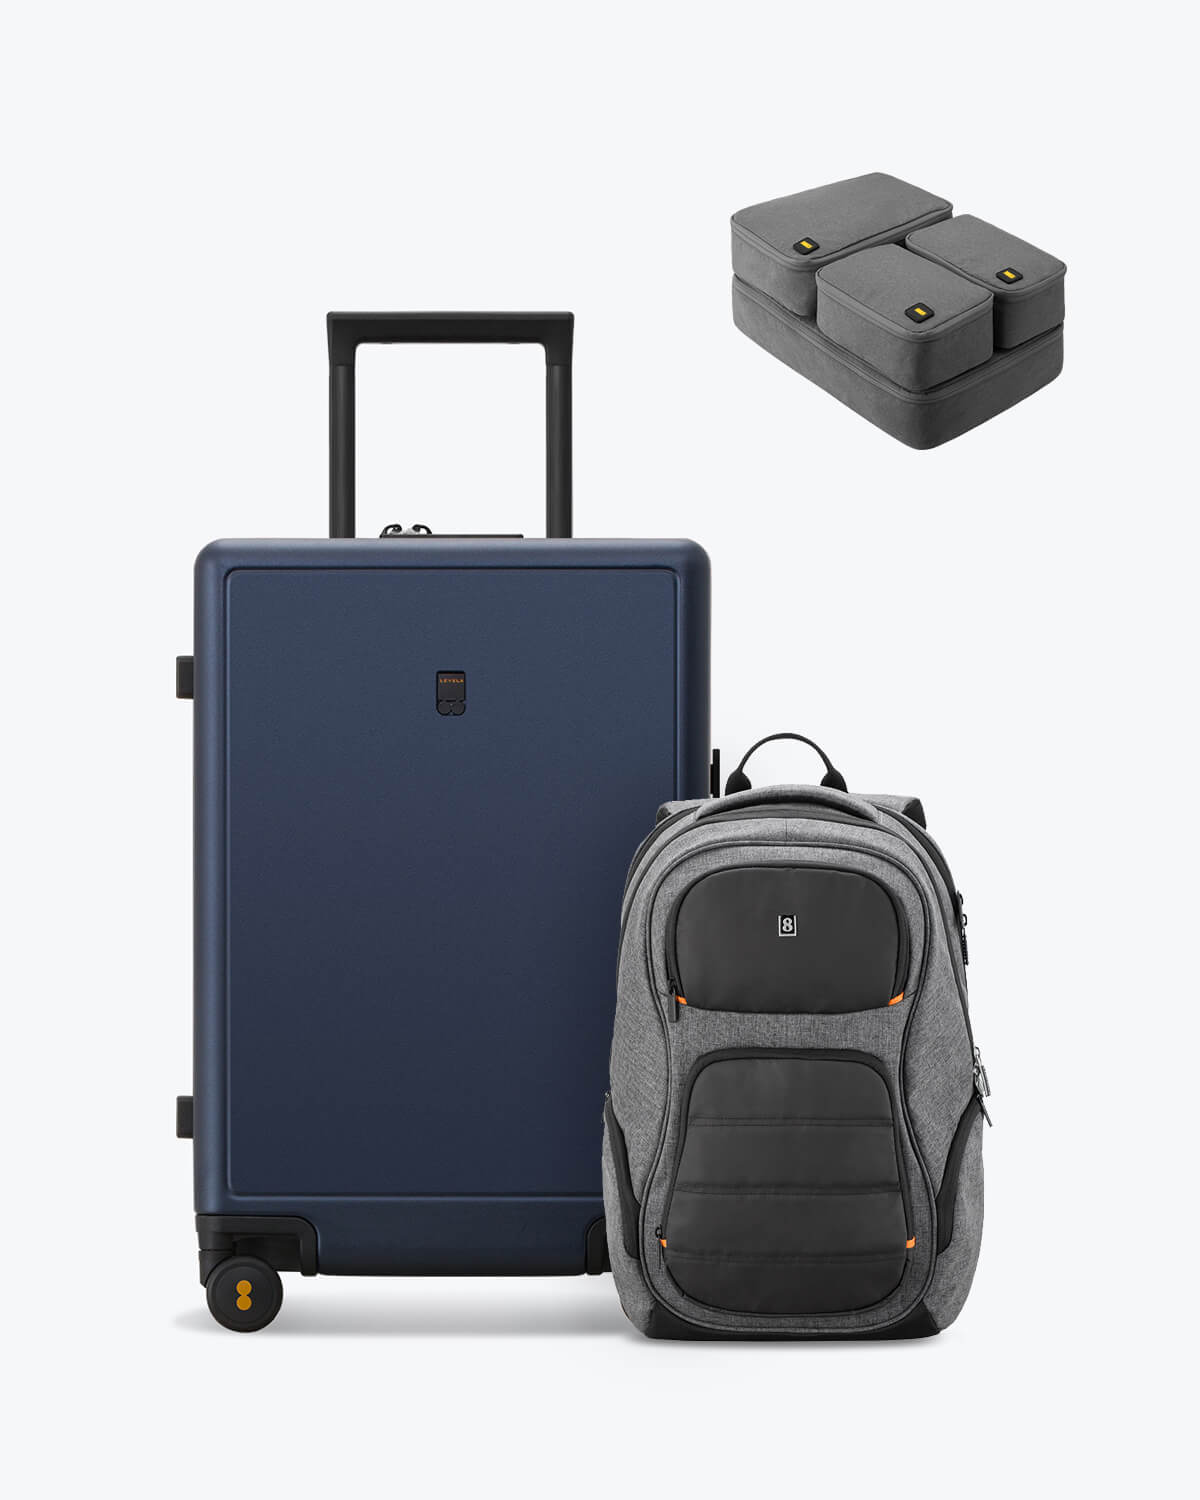 Condor Backpack & Carry-on Luggage  Level8: Travel with Style – LEVEL8